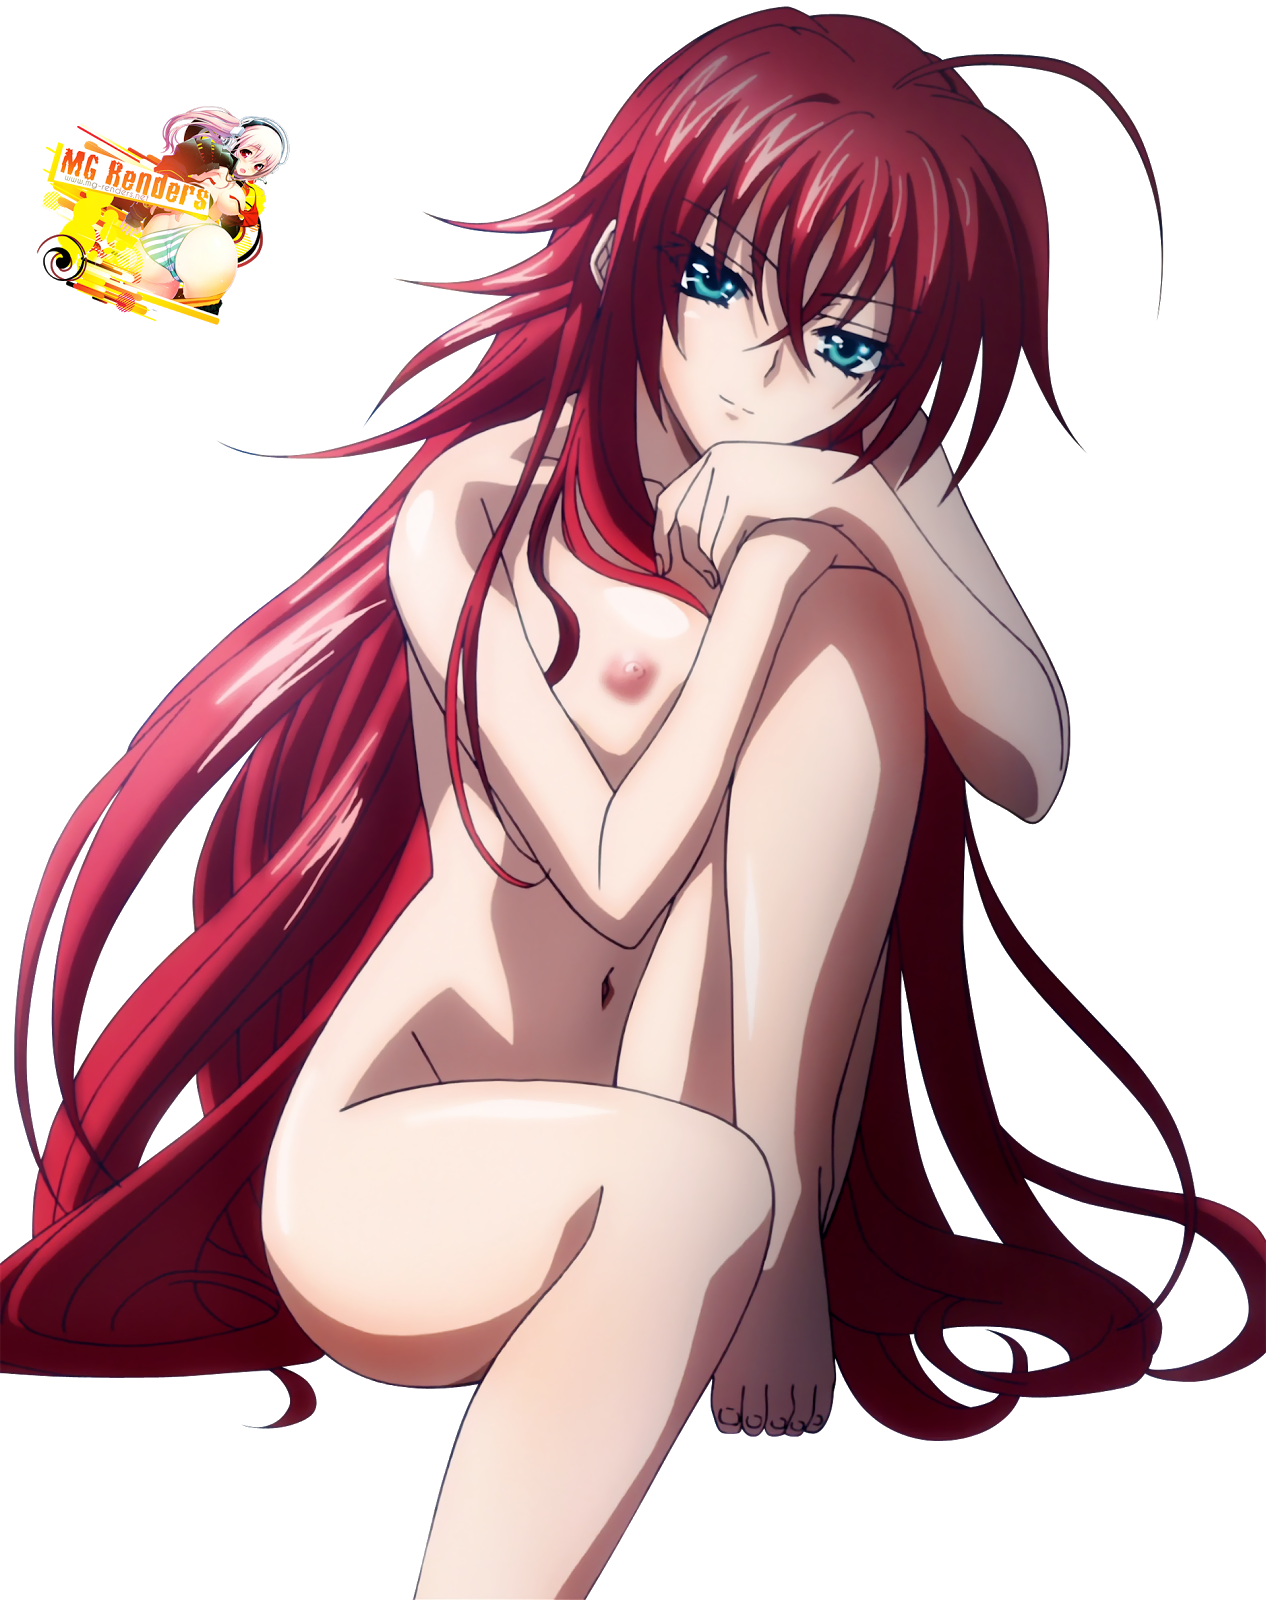 mg-renders.net High School DxD - Rias Gremory Render 49 Ecchi Hentai Naked.